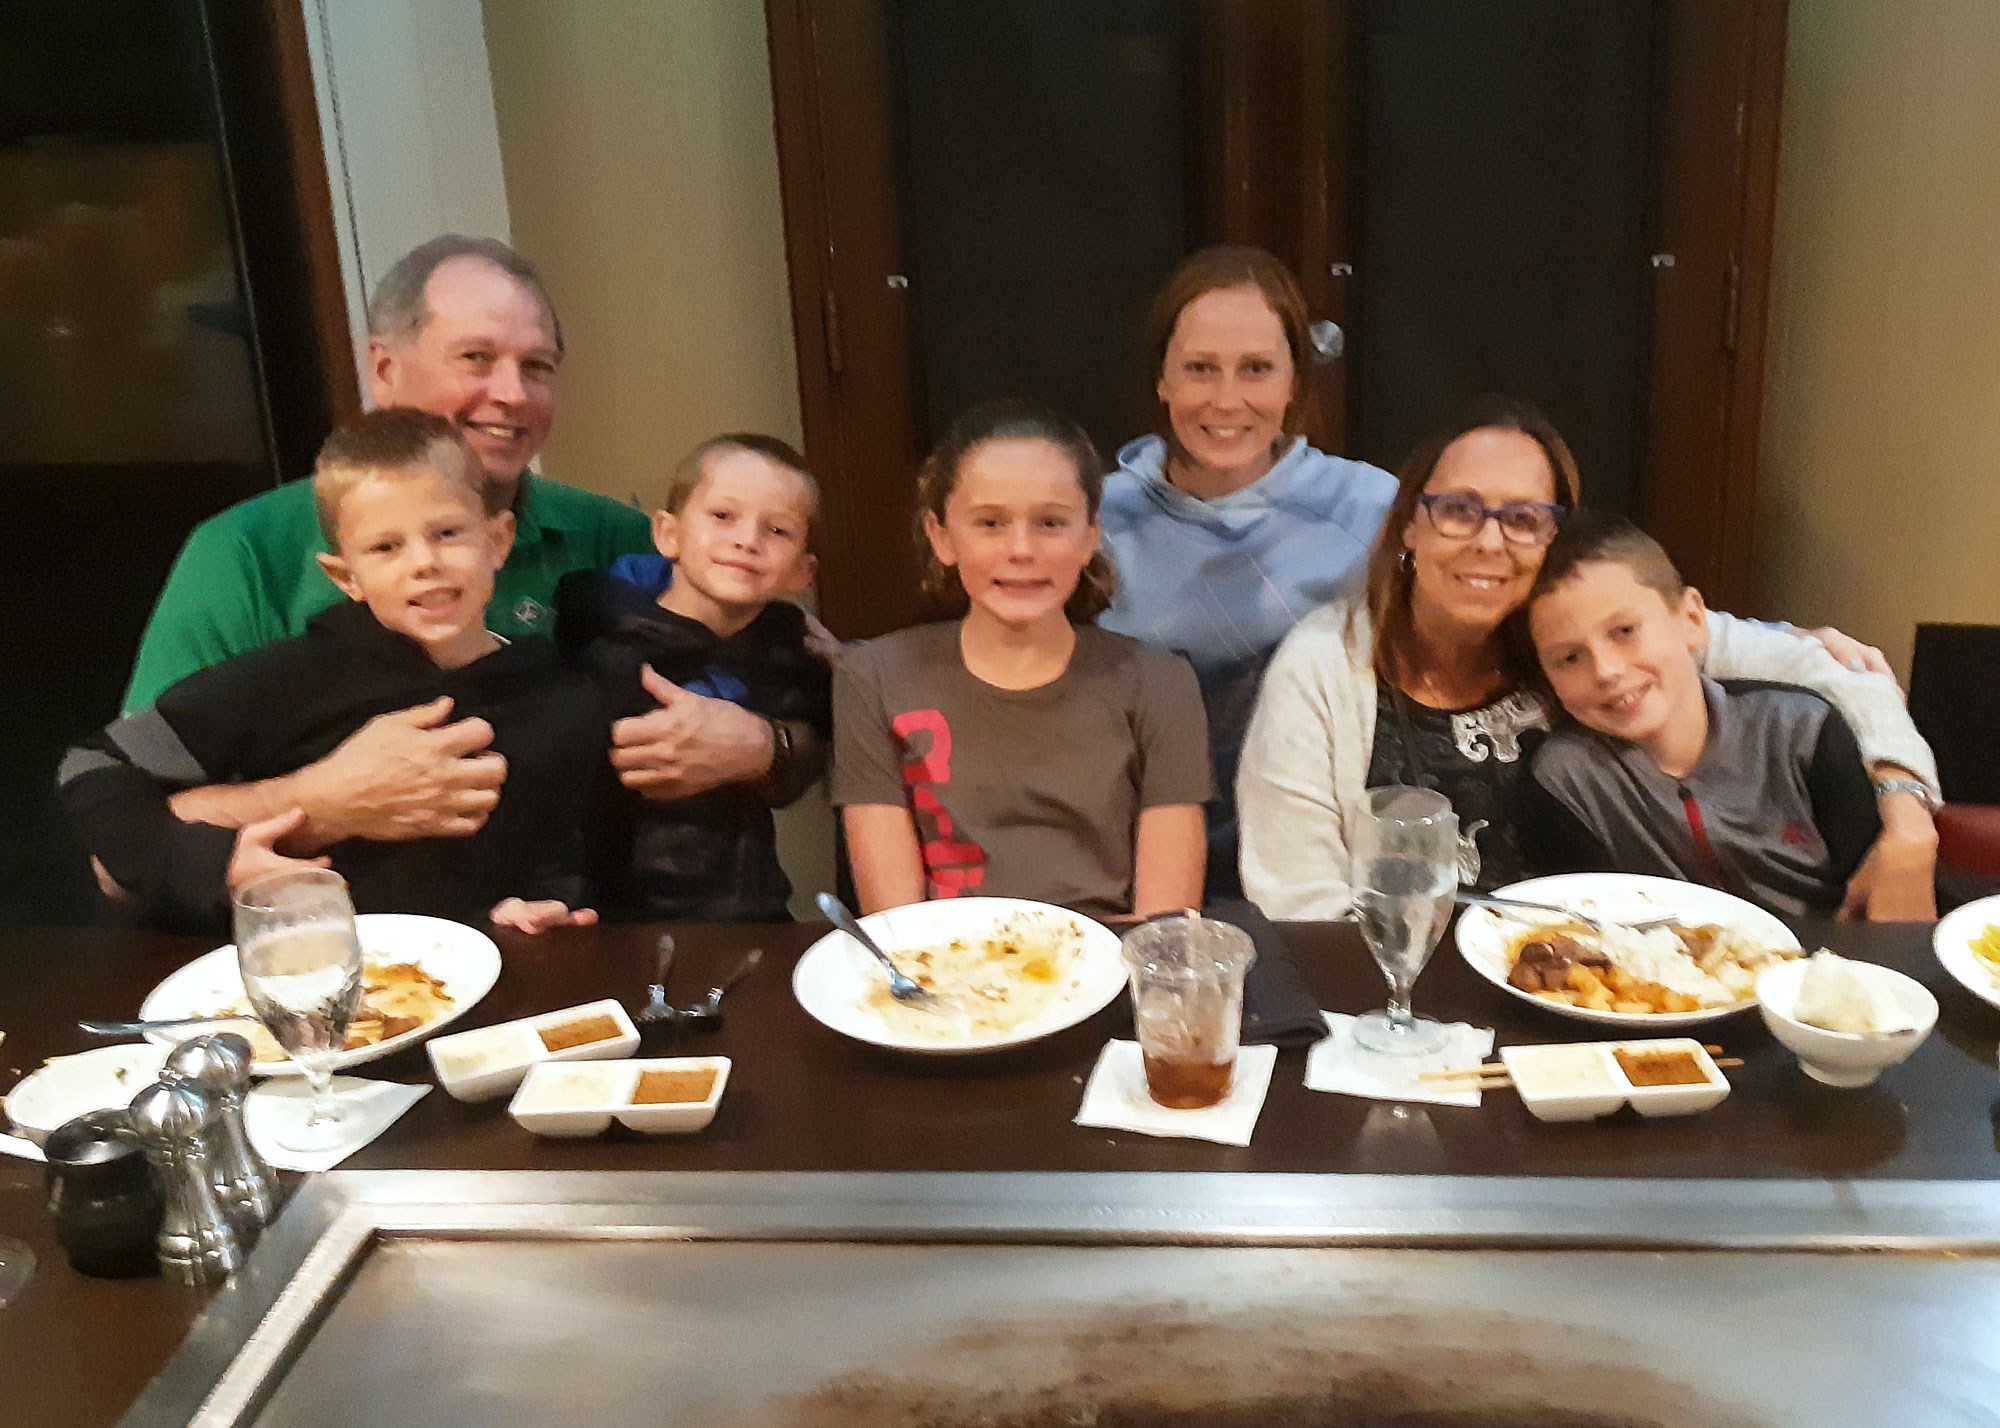 Senator Keating with her family at a restaurant in Moncton, New Brunswick. (Photo credit: Office of the late Senator Keating)